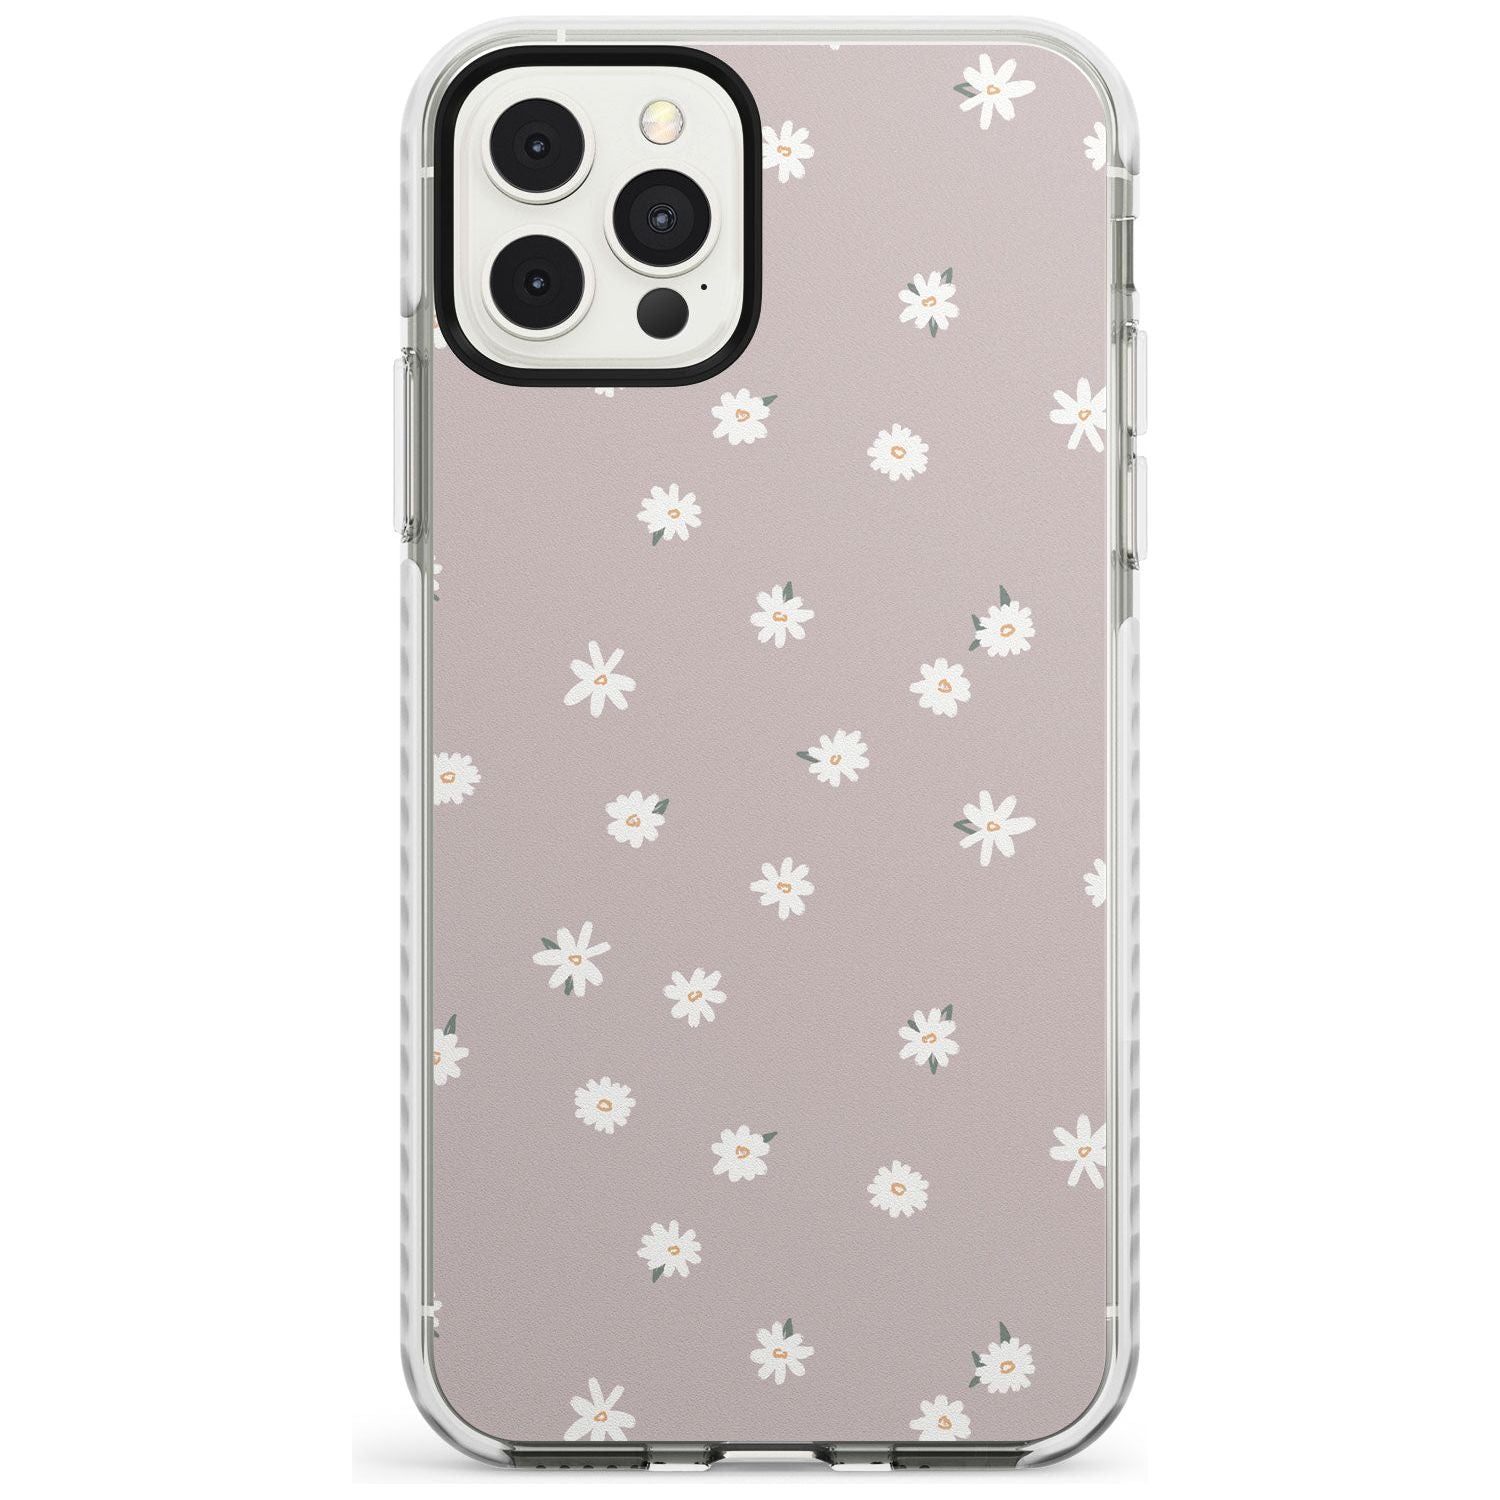 Painted Daises - Dark Pink Cute Floral Design Slim TPU Phone Case for iPhone 11 Pro Max